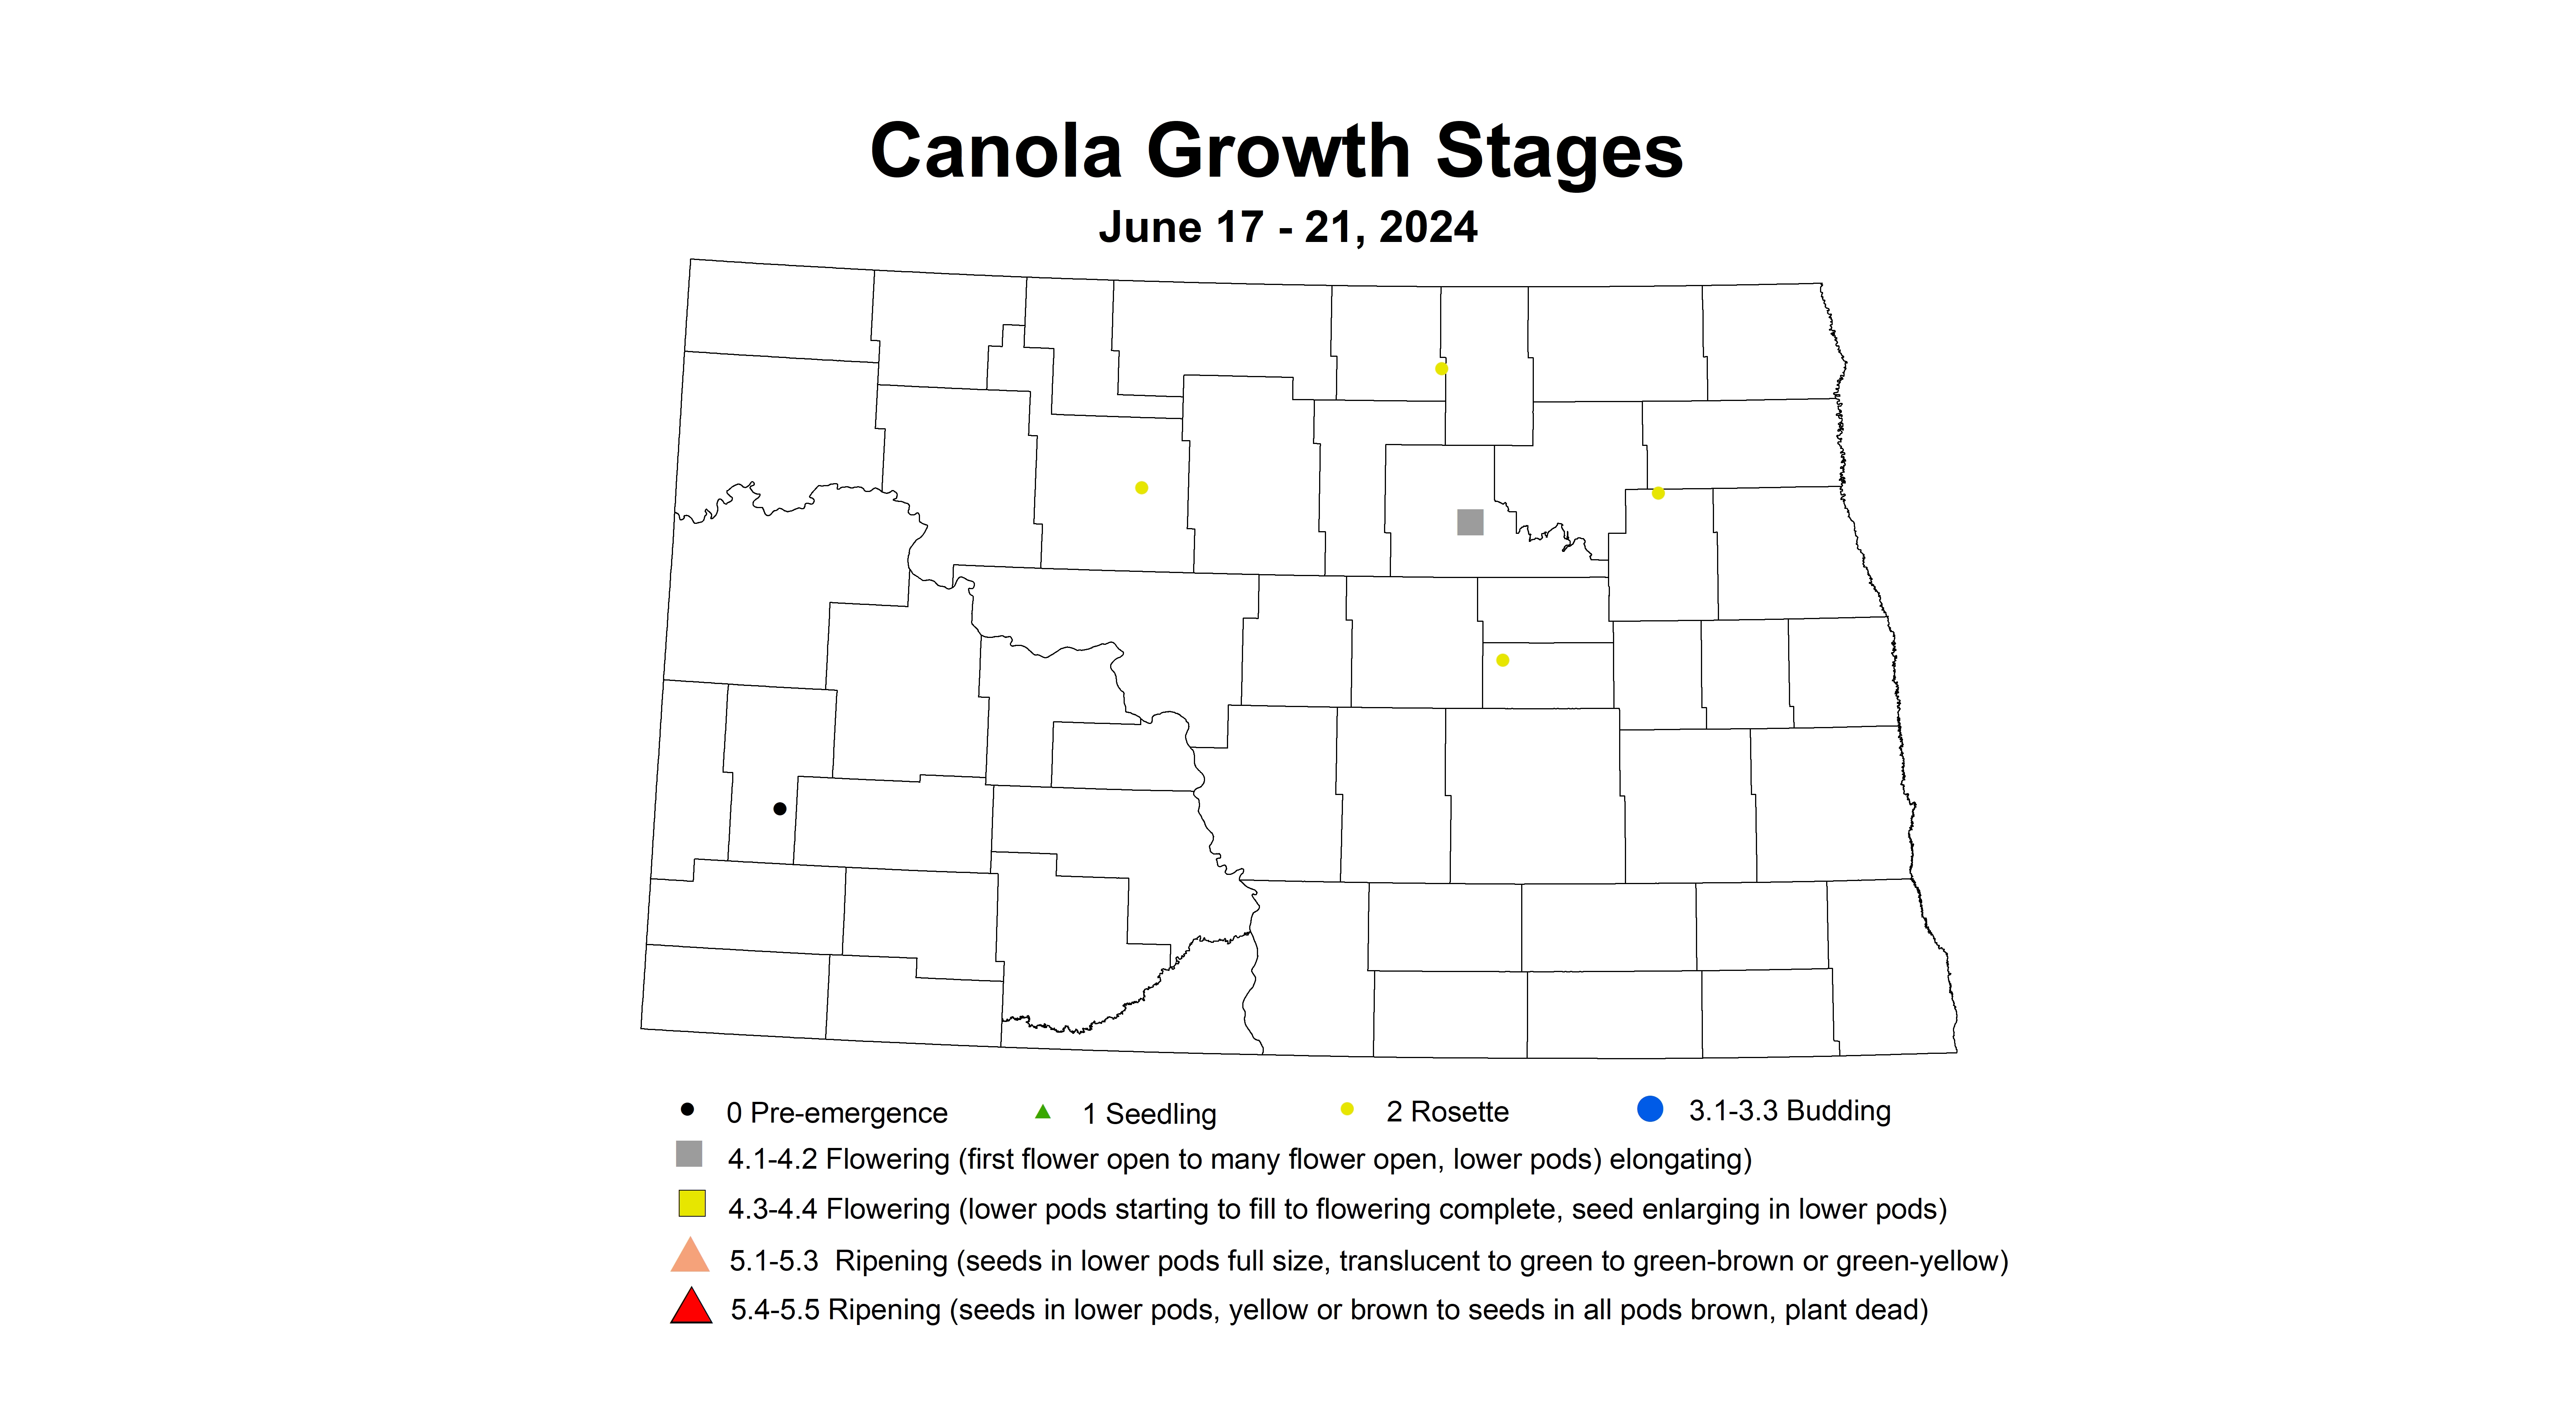 canola growth stage 6.17-6.21 2024